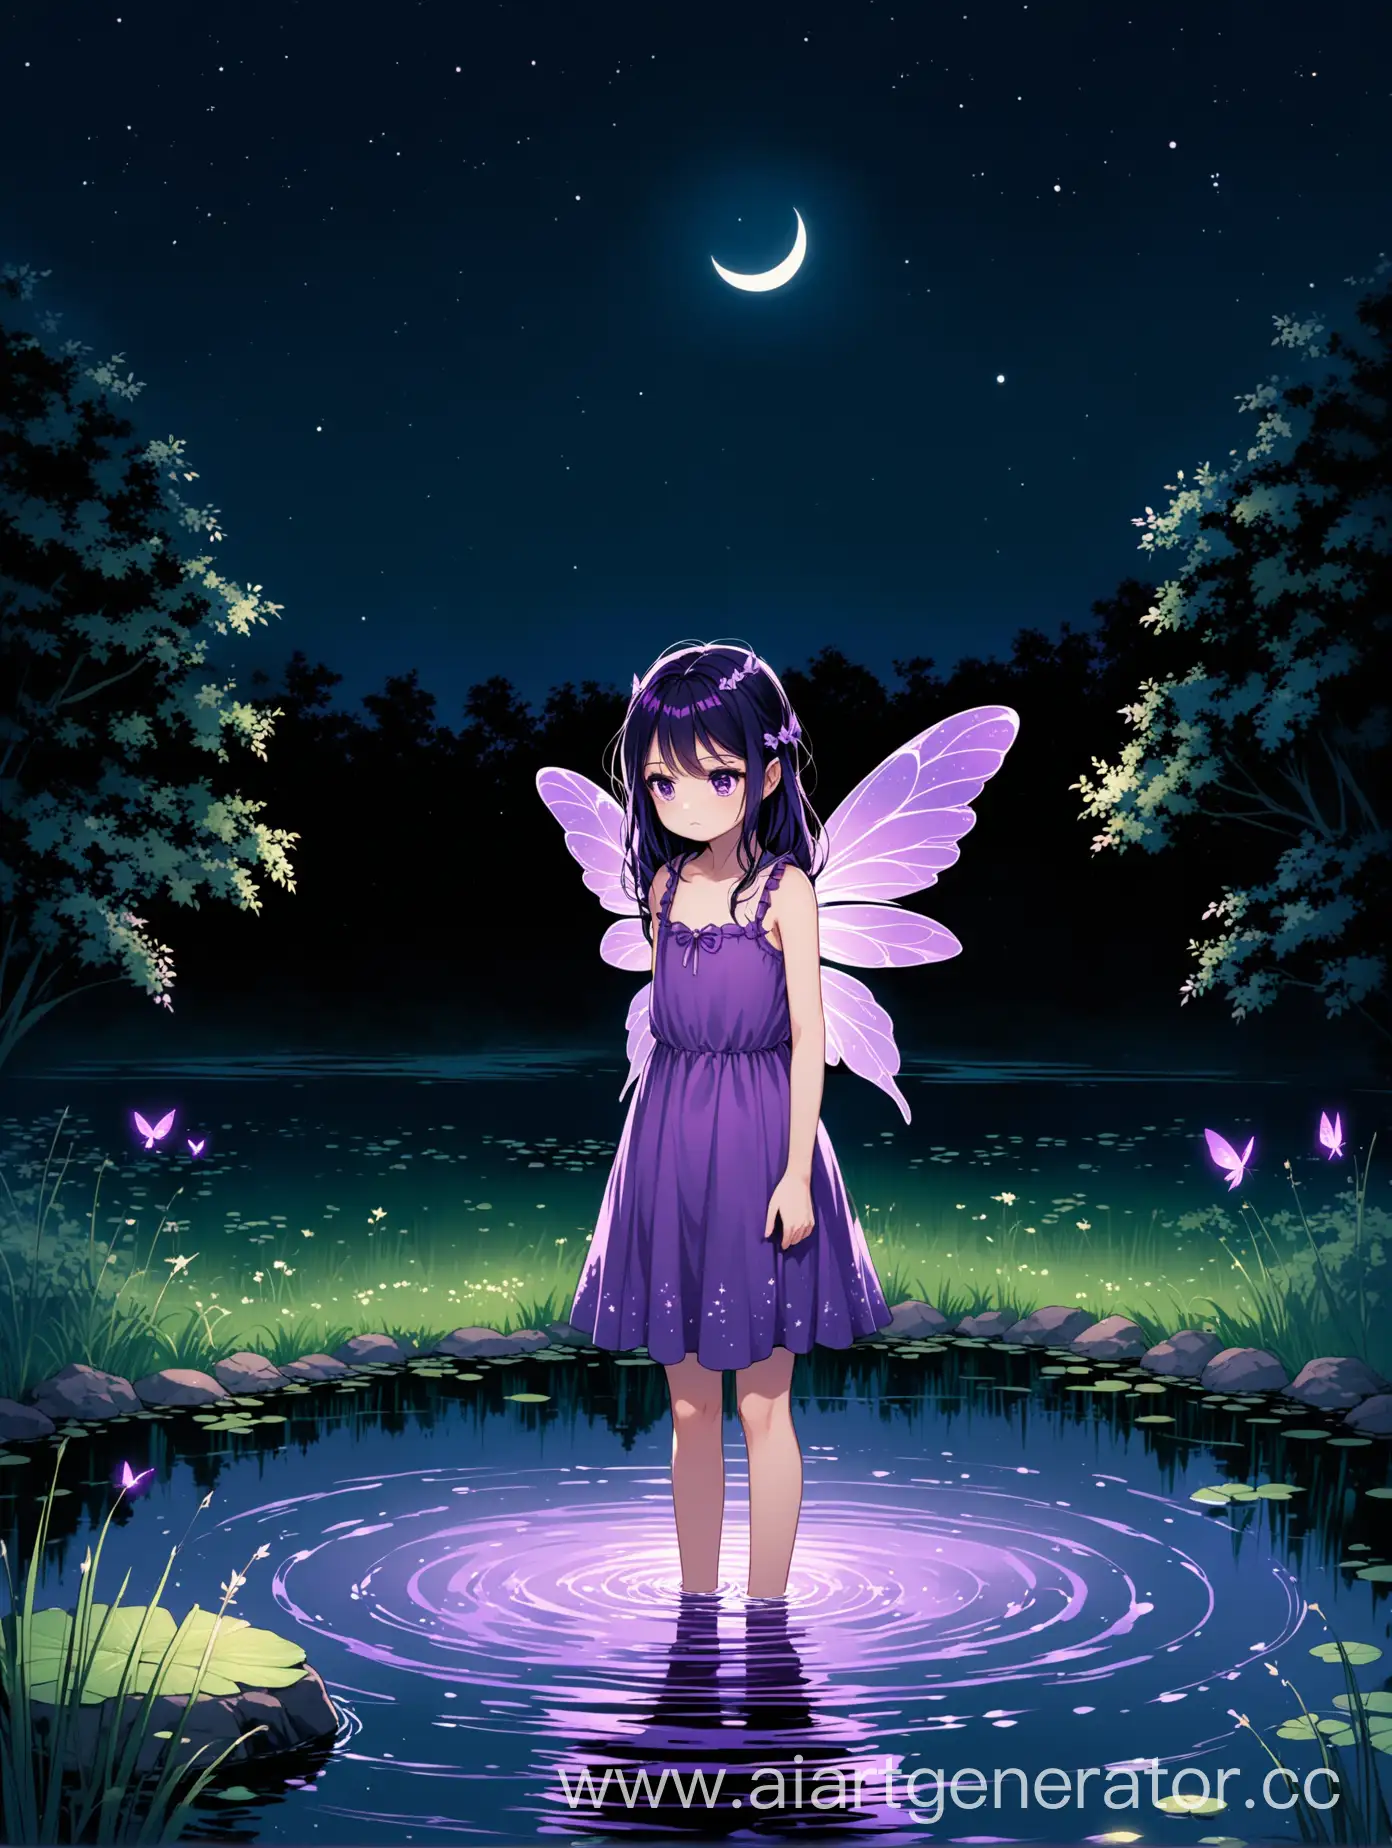 Discontented-Fairy-Girl-by-the-Pond-at-Night